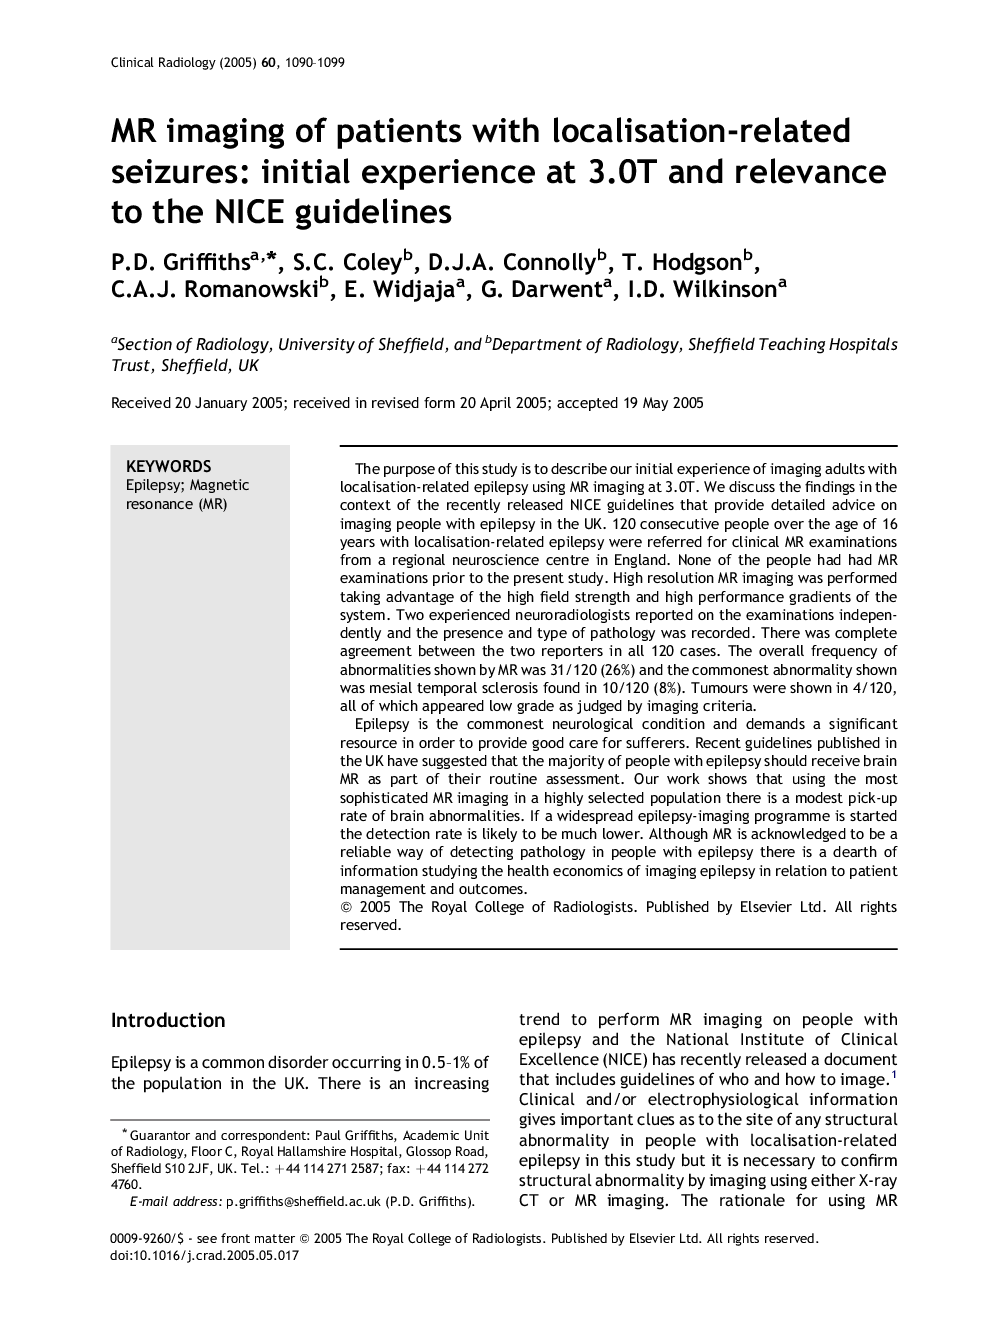 MR imaging of patients with localisation-related seizures: initial experience at 3.0T and relevance to the NICE guidelines